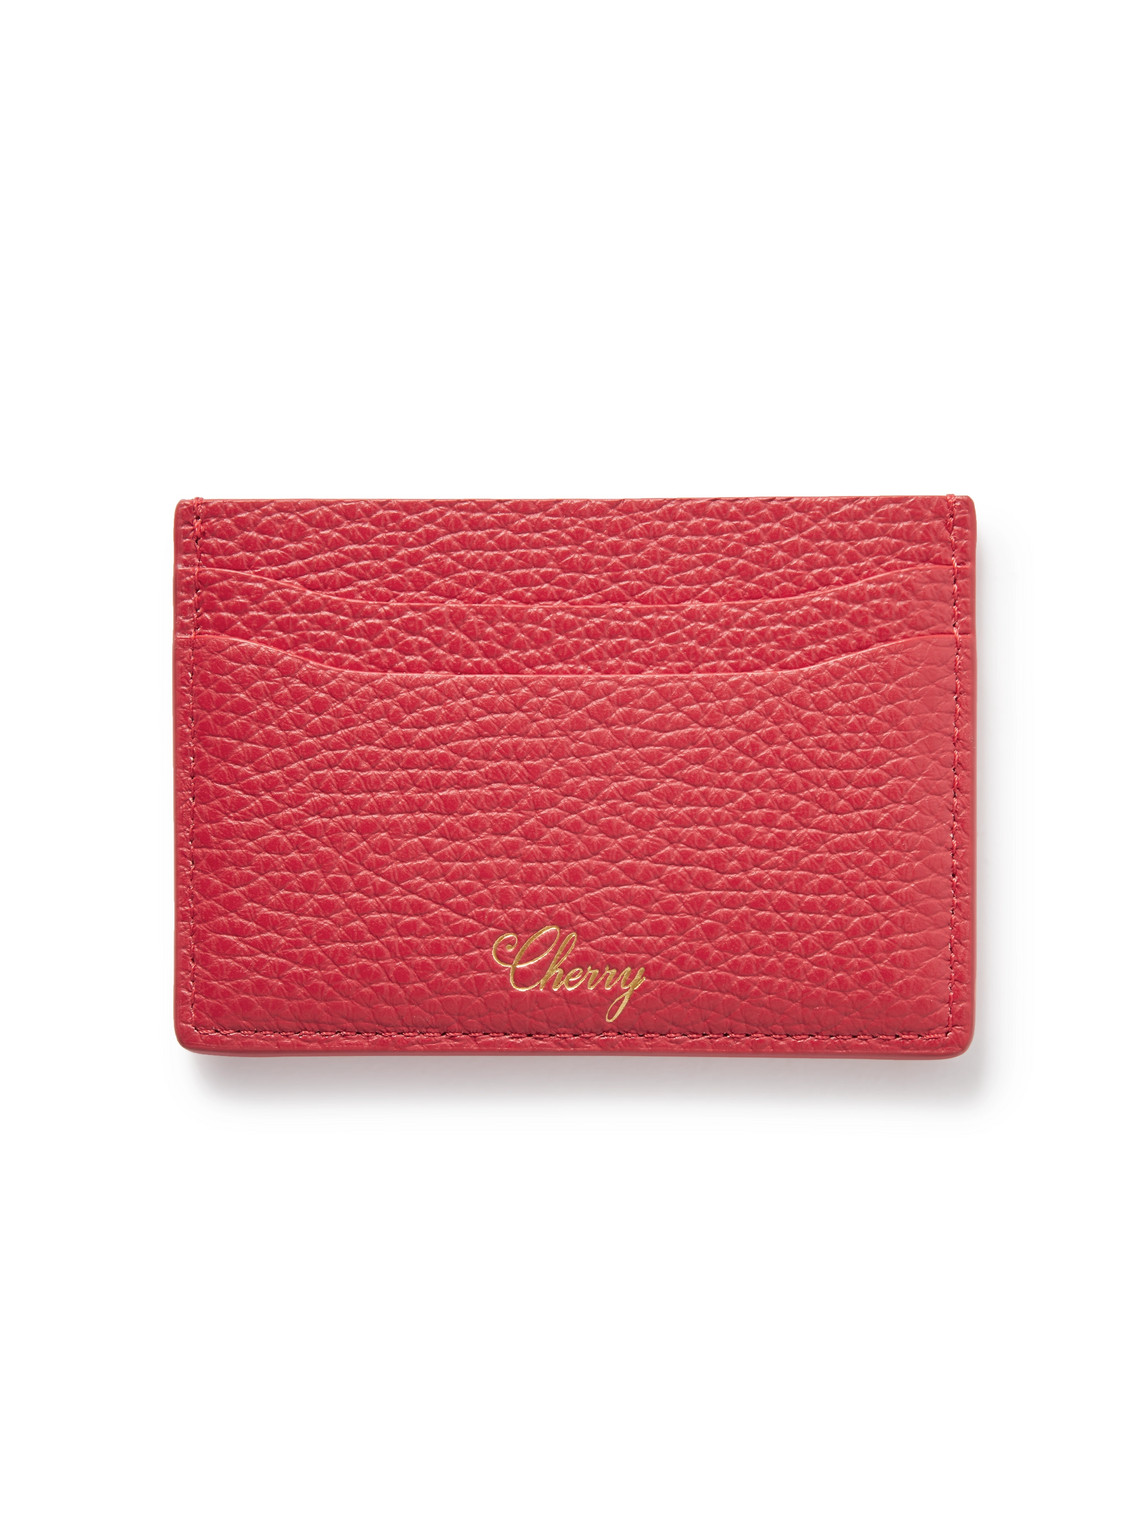 Cherry Los Angeles Full-grain Leather Cardholder In Red